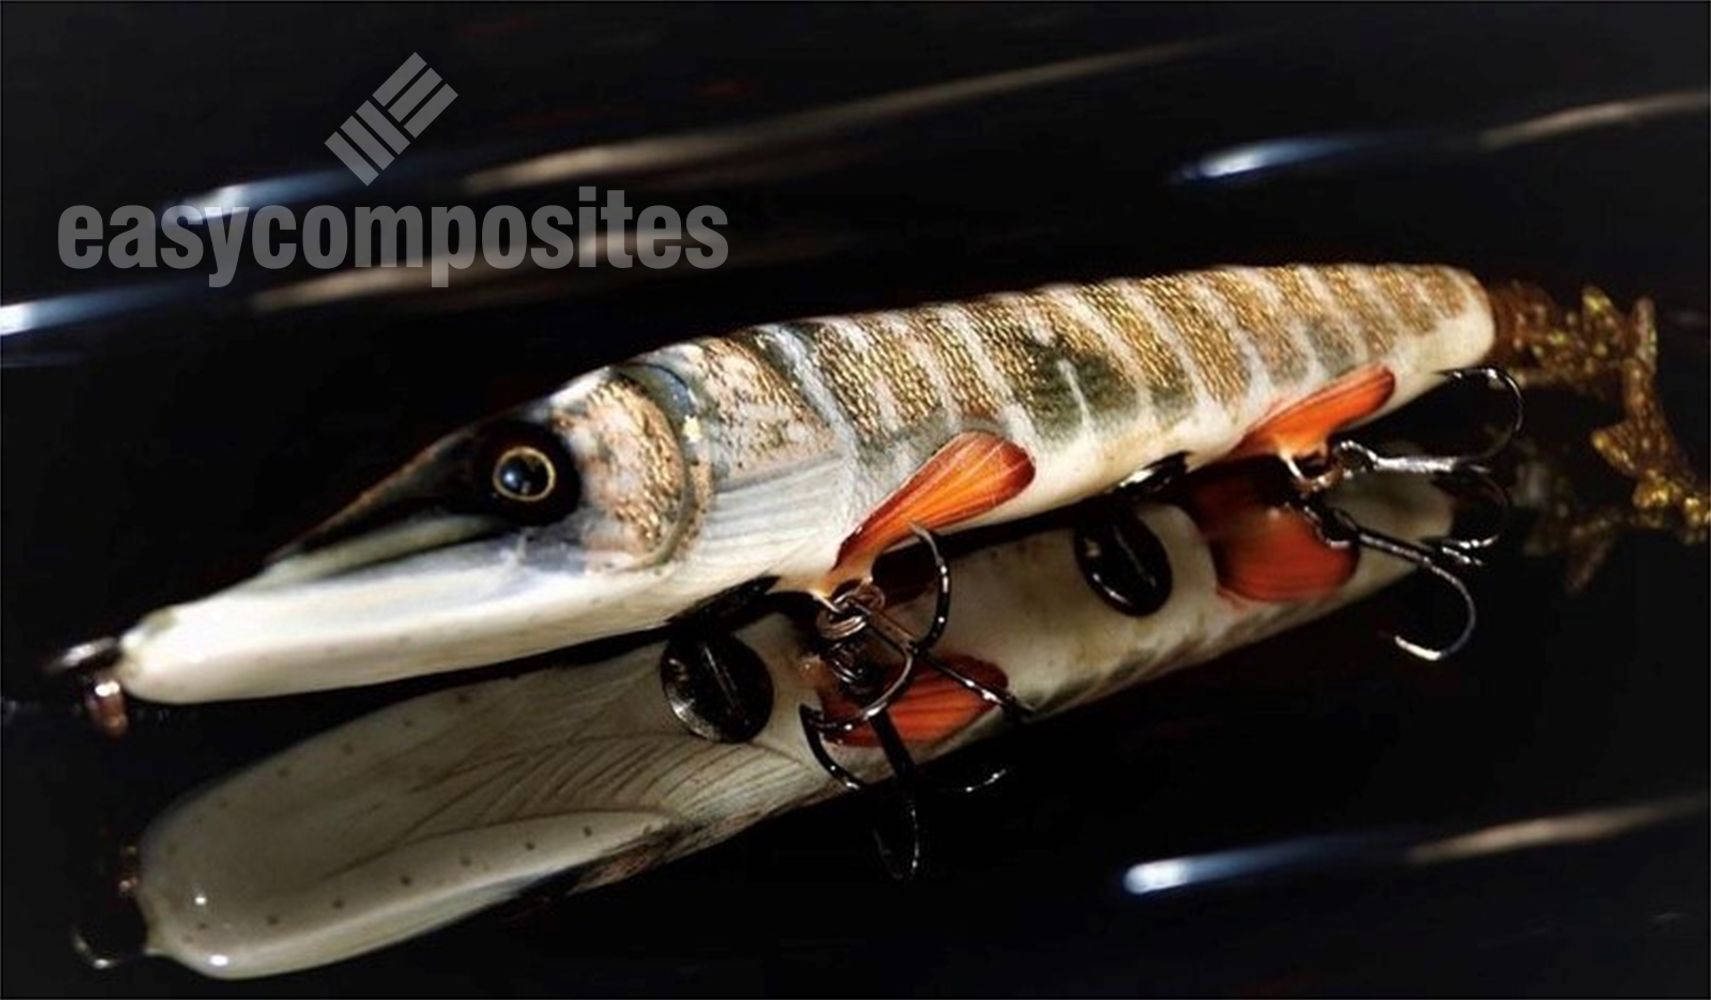 Handcrafted Fishing Lures - Easy Composites